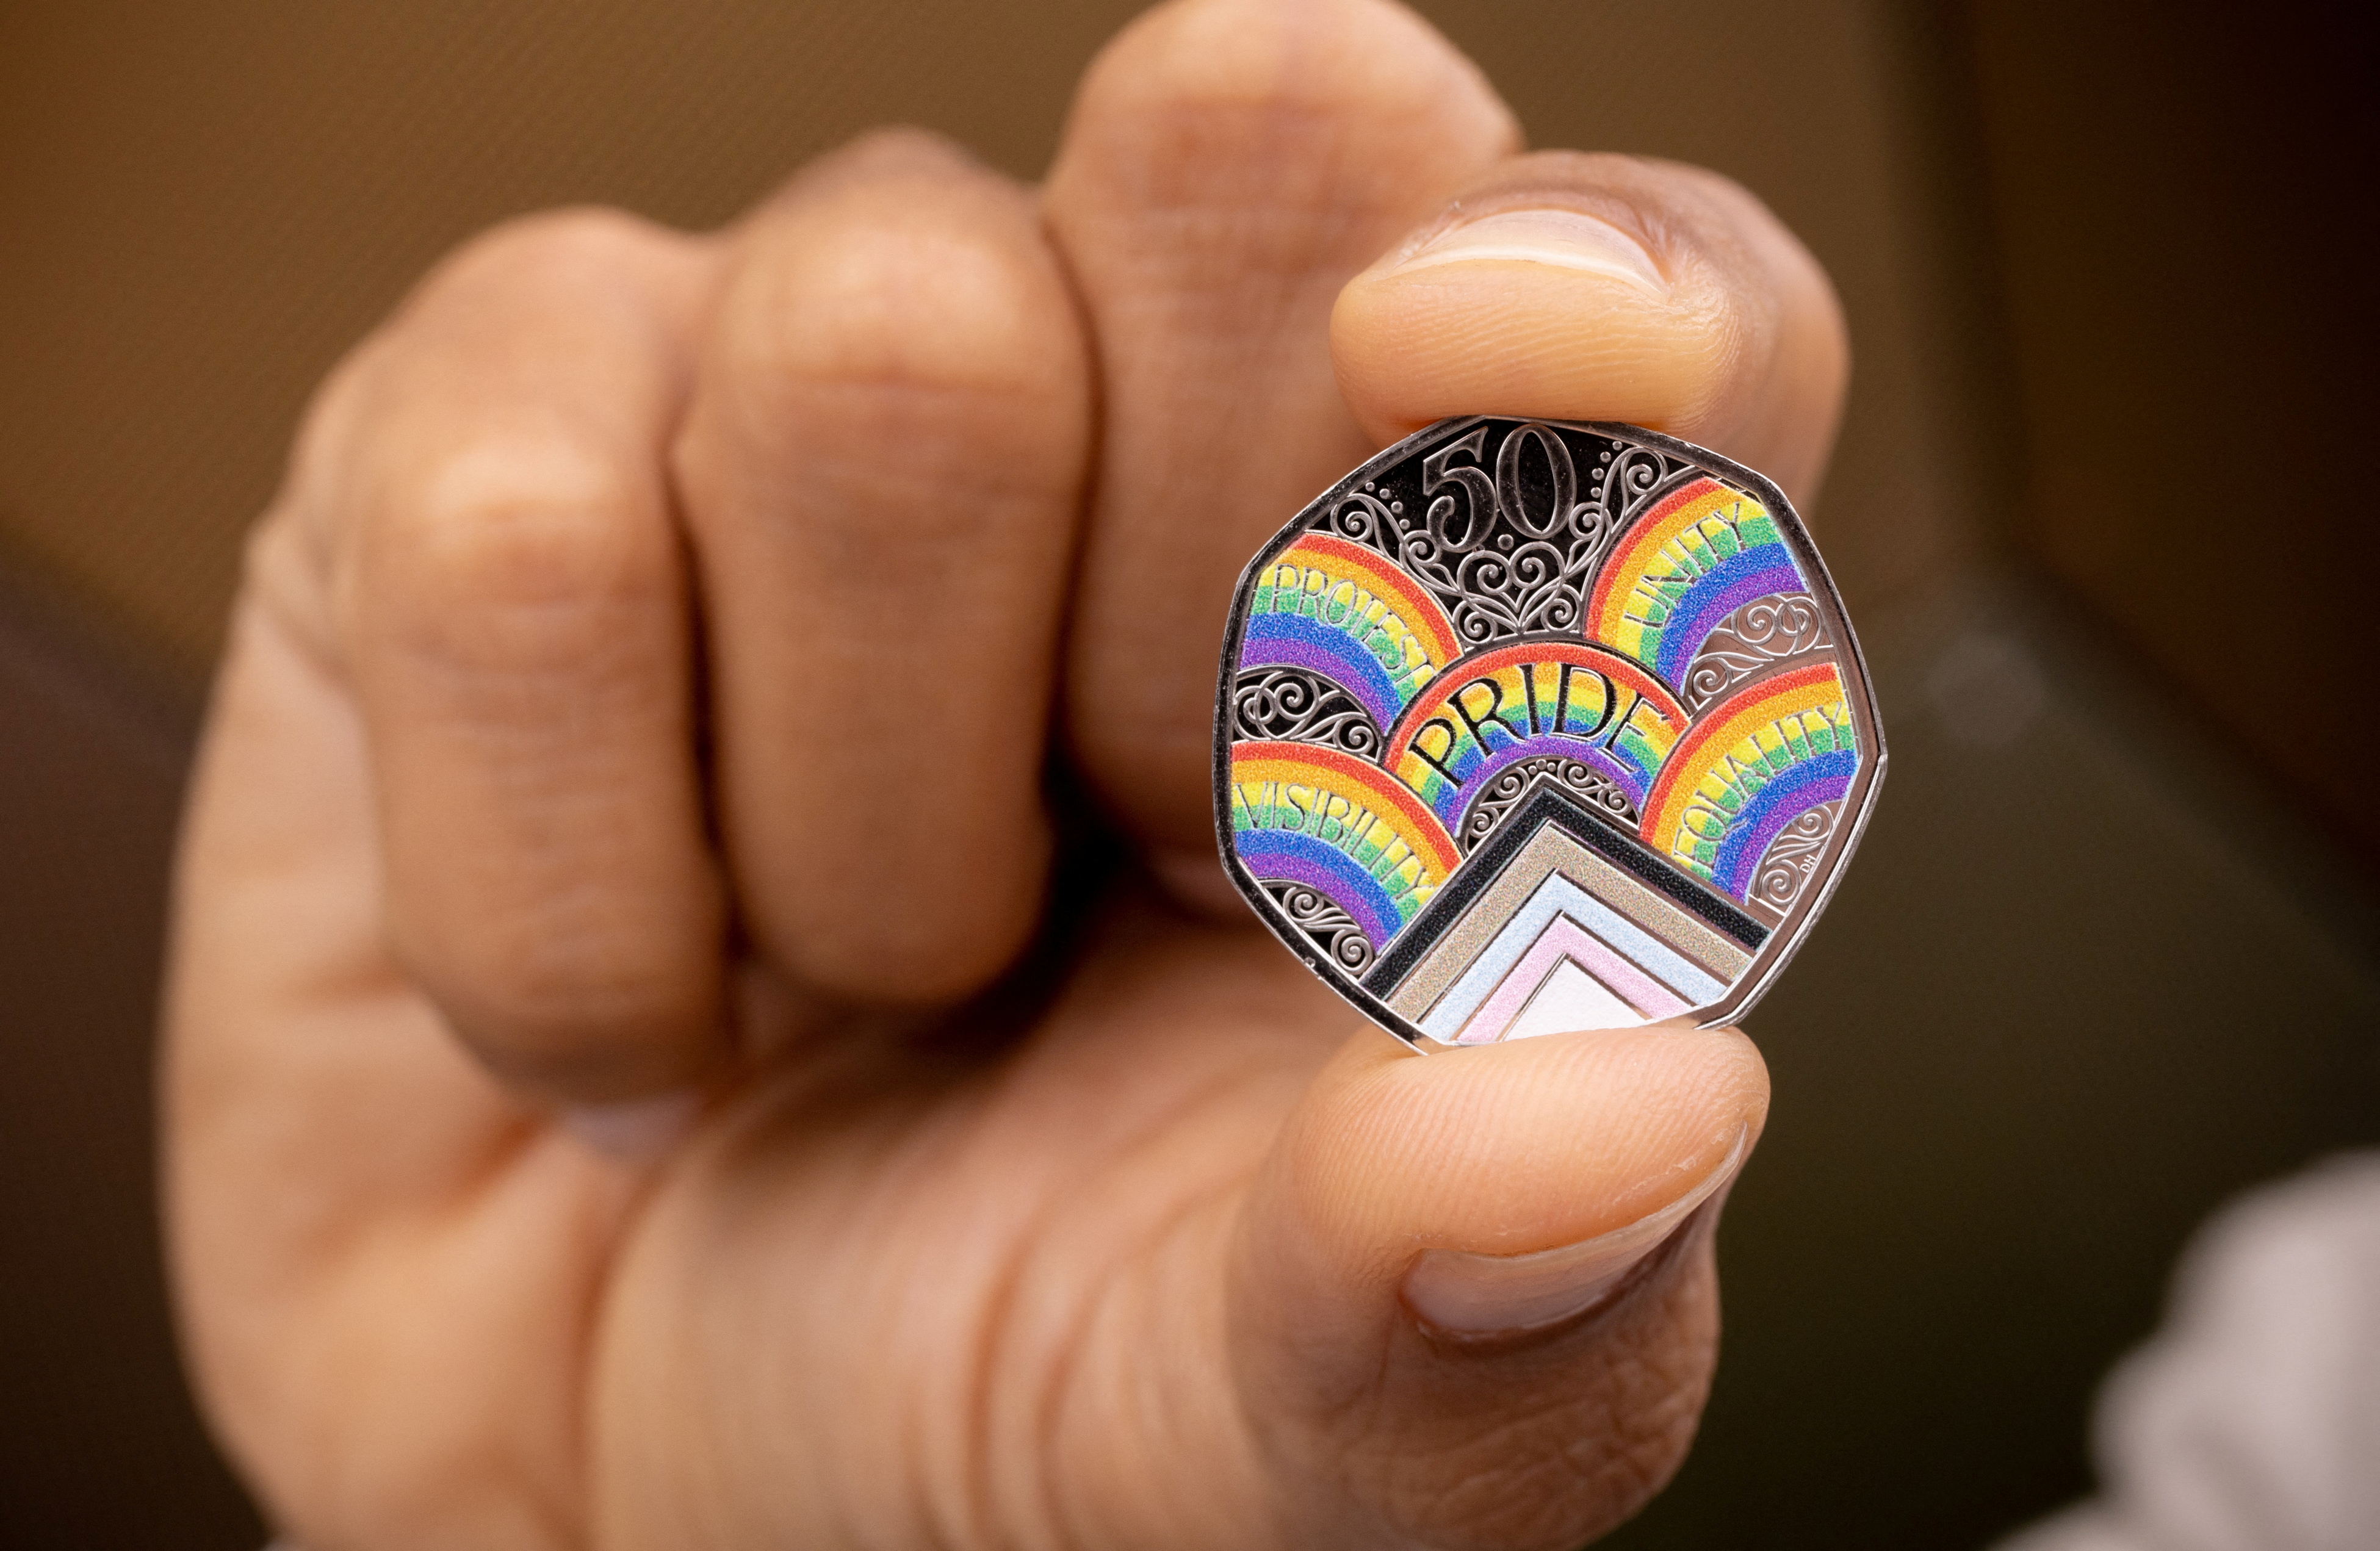 Britain's Royal Mint unveils commemorative 50p coin to celebrate 50th anniversary of Pride UK